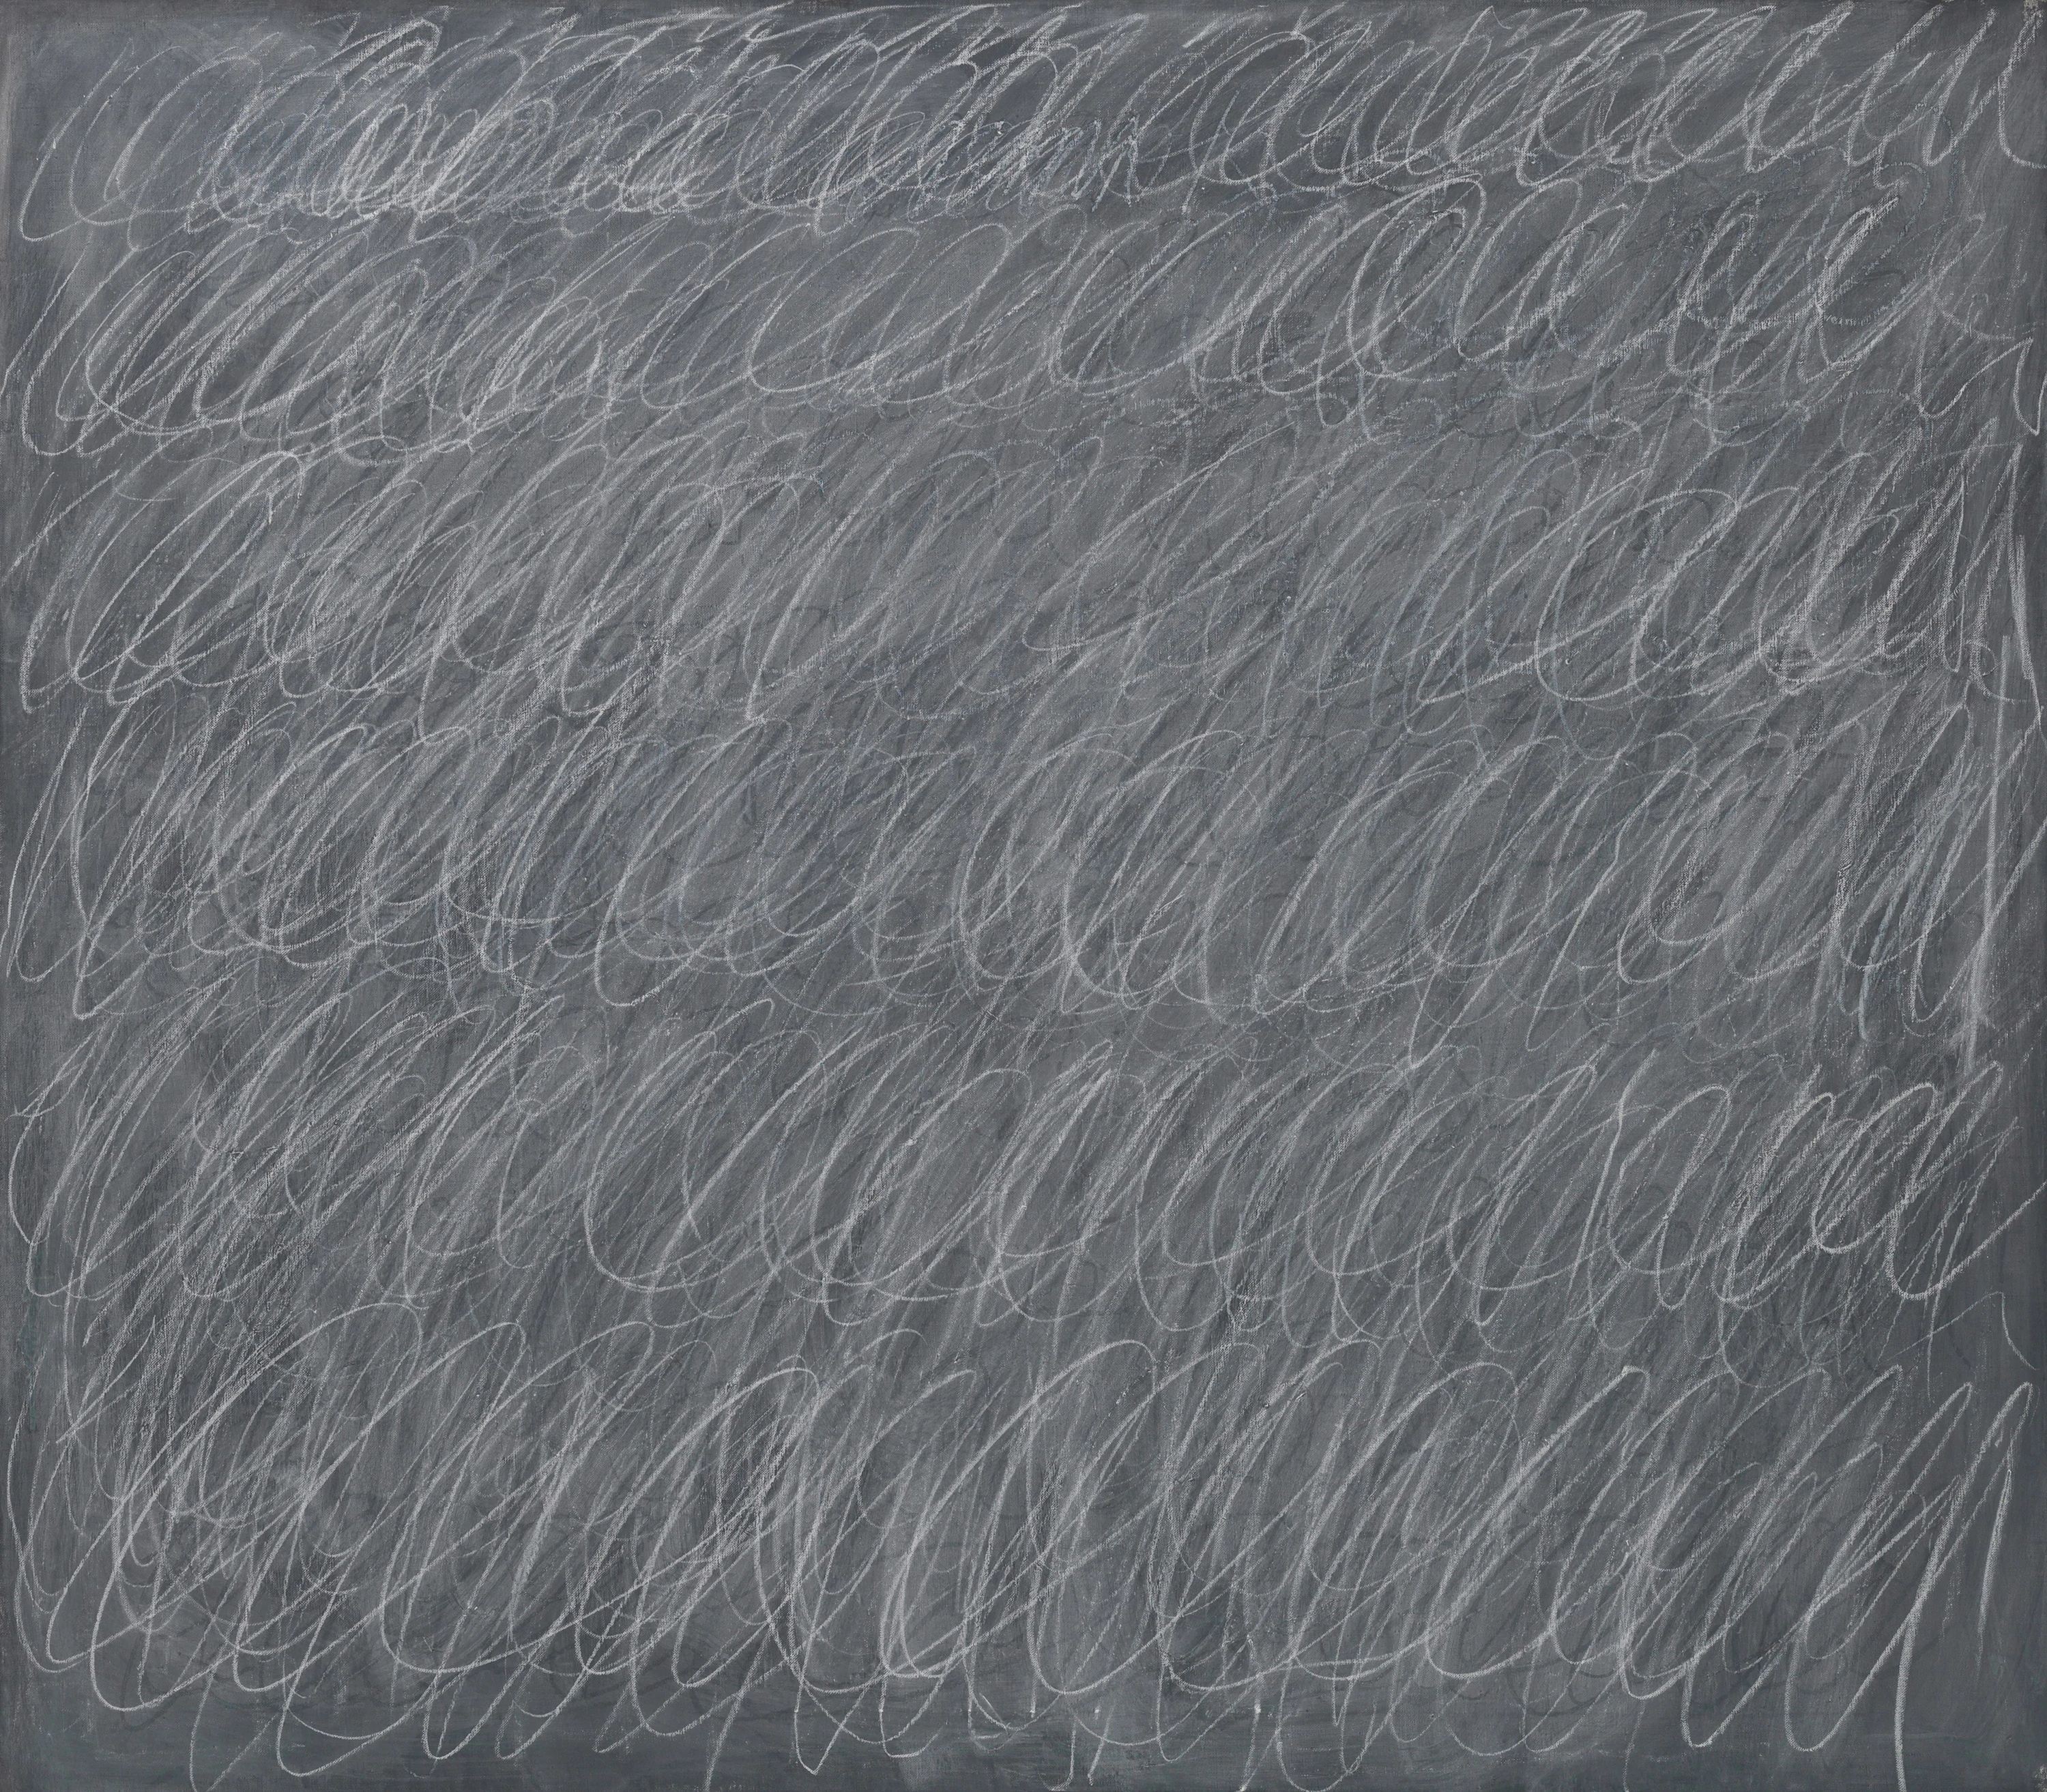 Untitled (1967), Cy Twombly